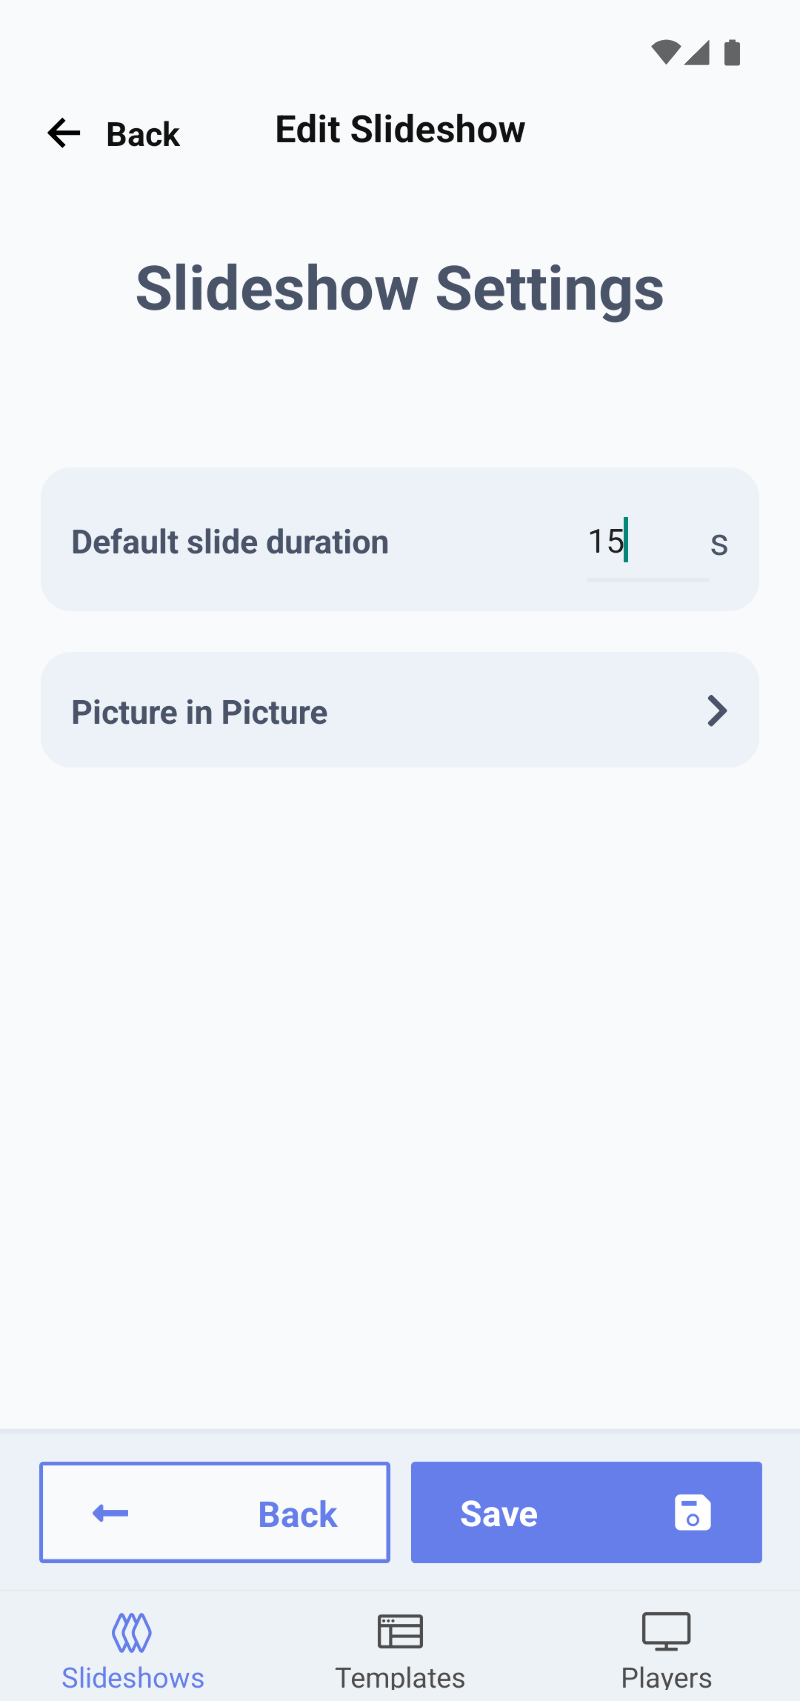 Application screenshot showing a "Slideshow Settings" page with a number input labelled "Slide duration"